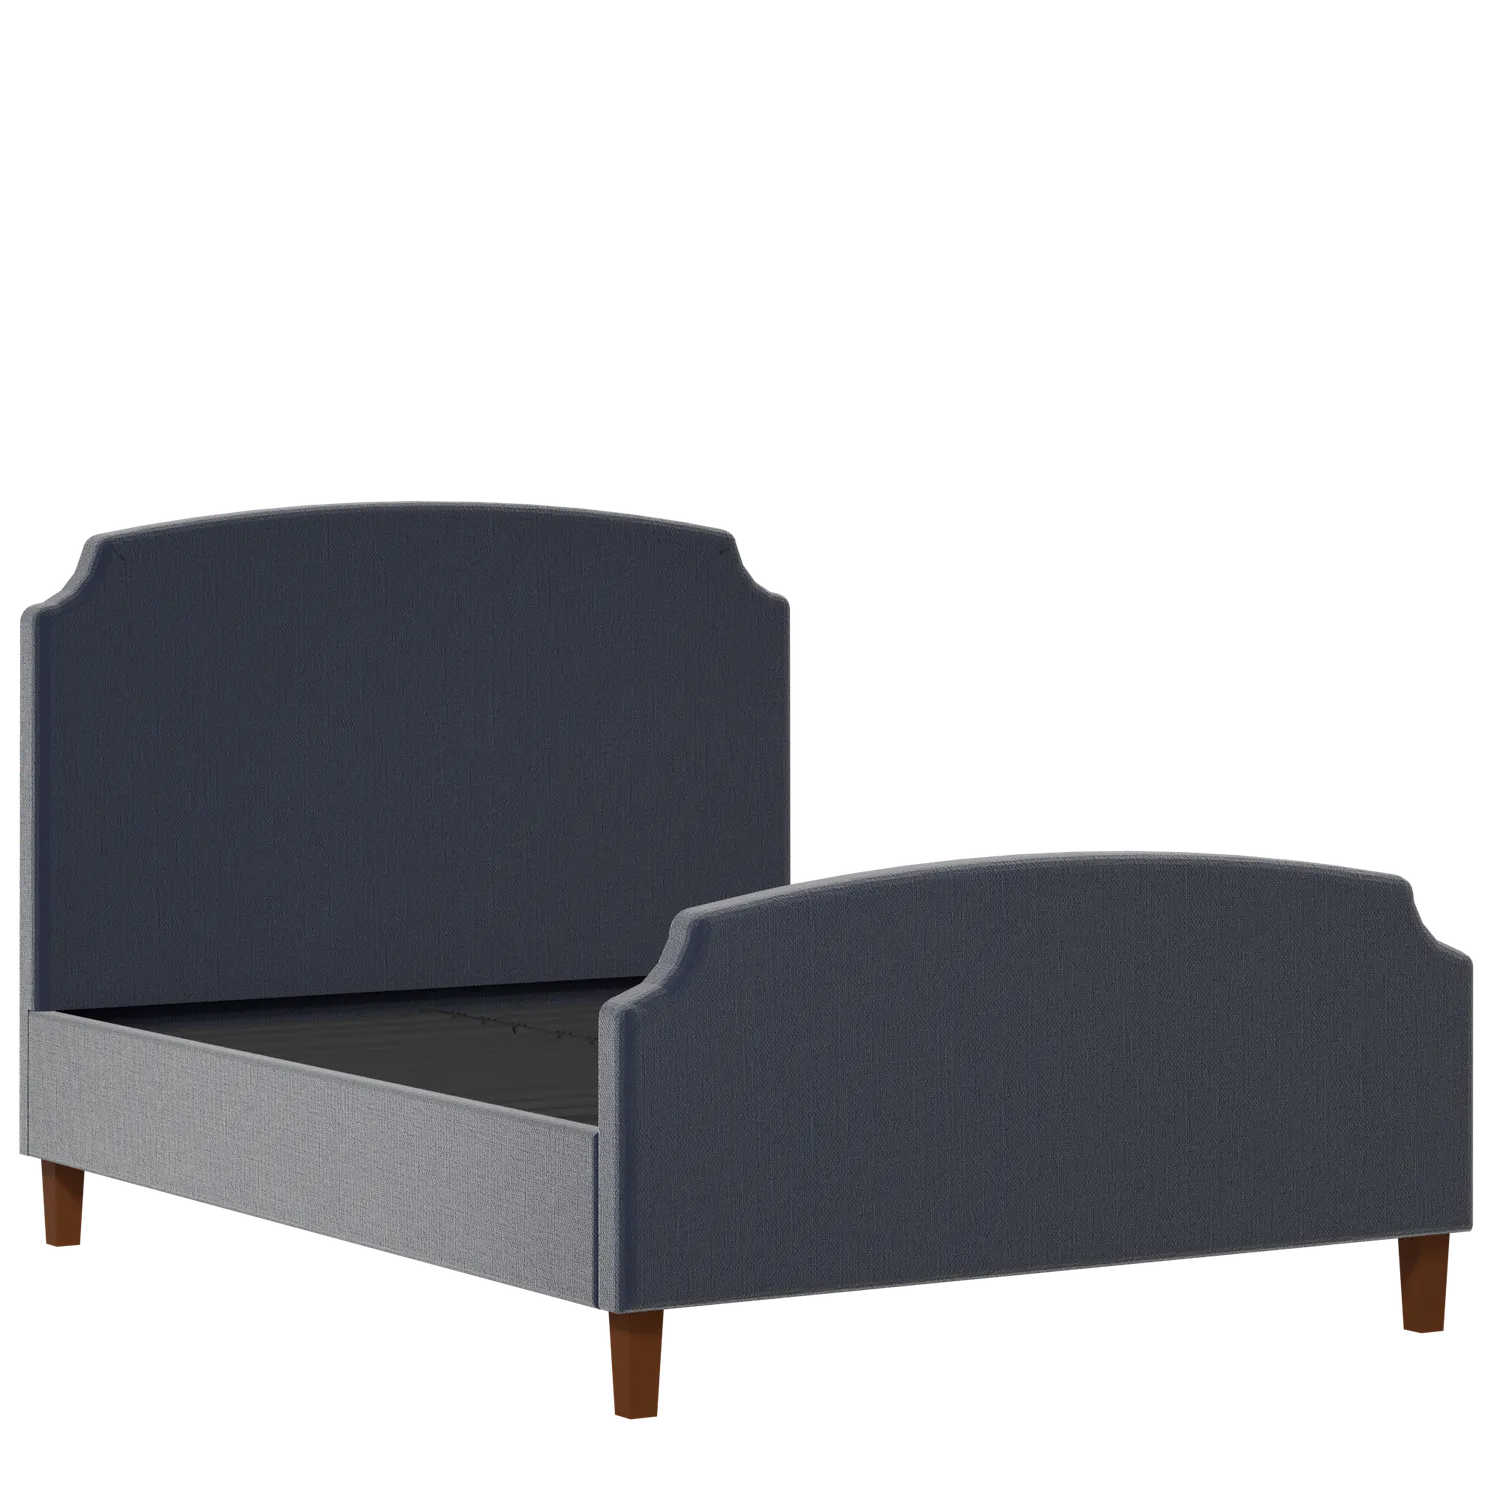 Poole upholstered bed in oxford blue fabric